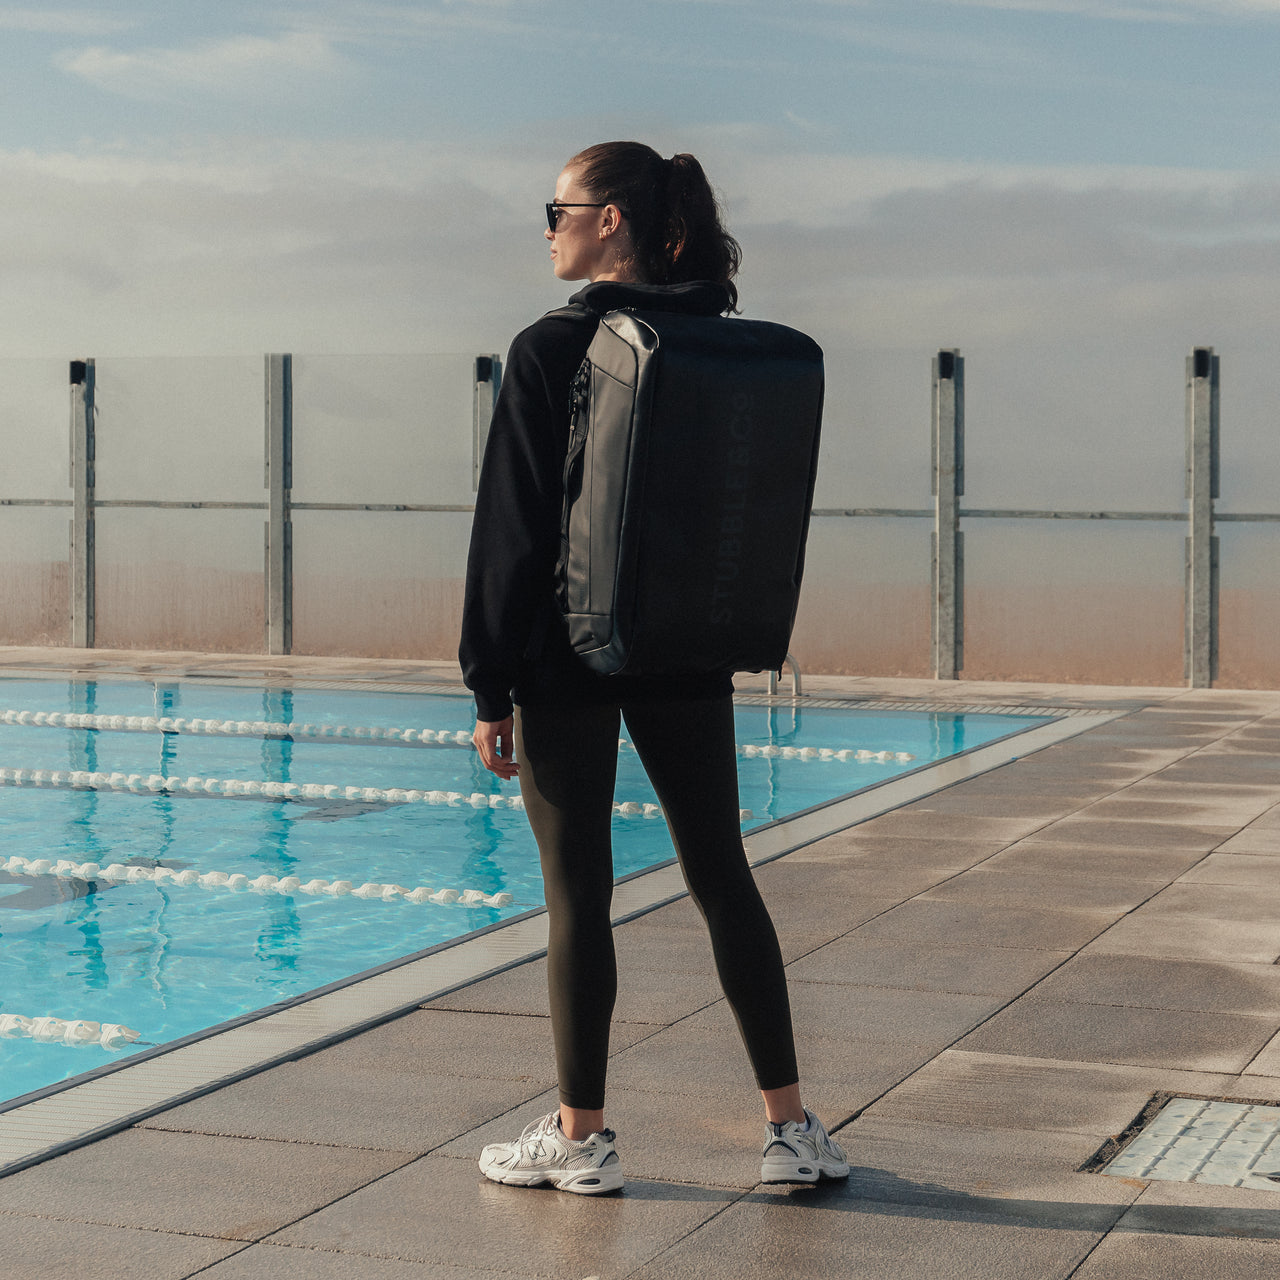 Women wearing The Kit Bag All Black Backpack by swimming pool